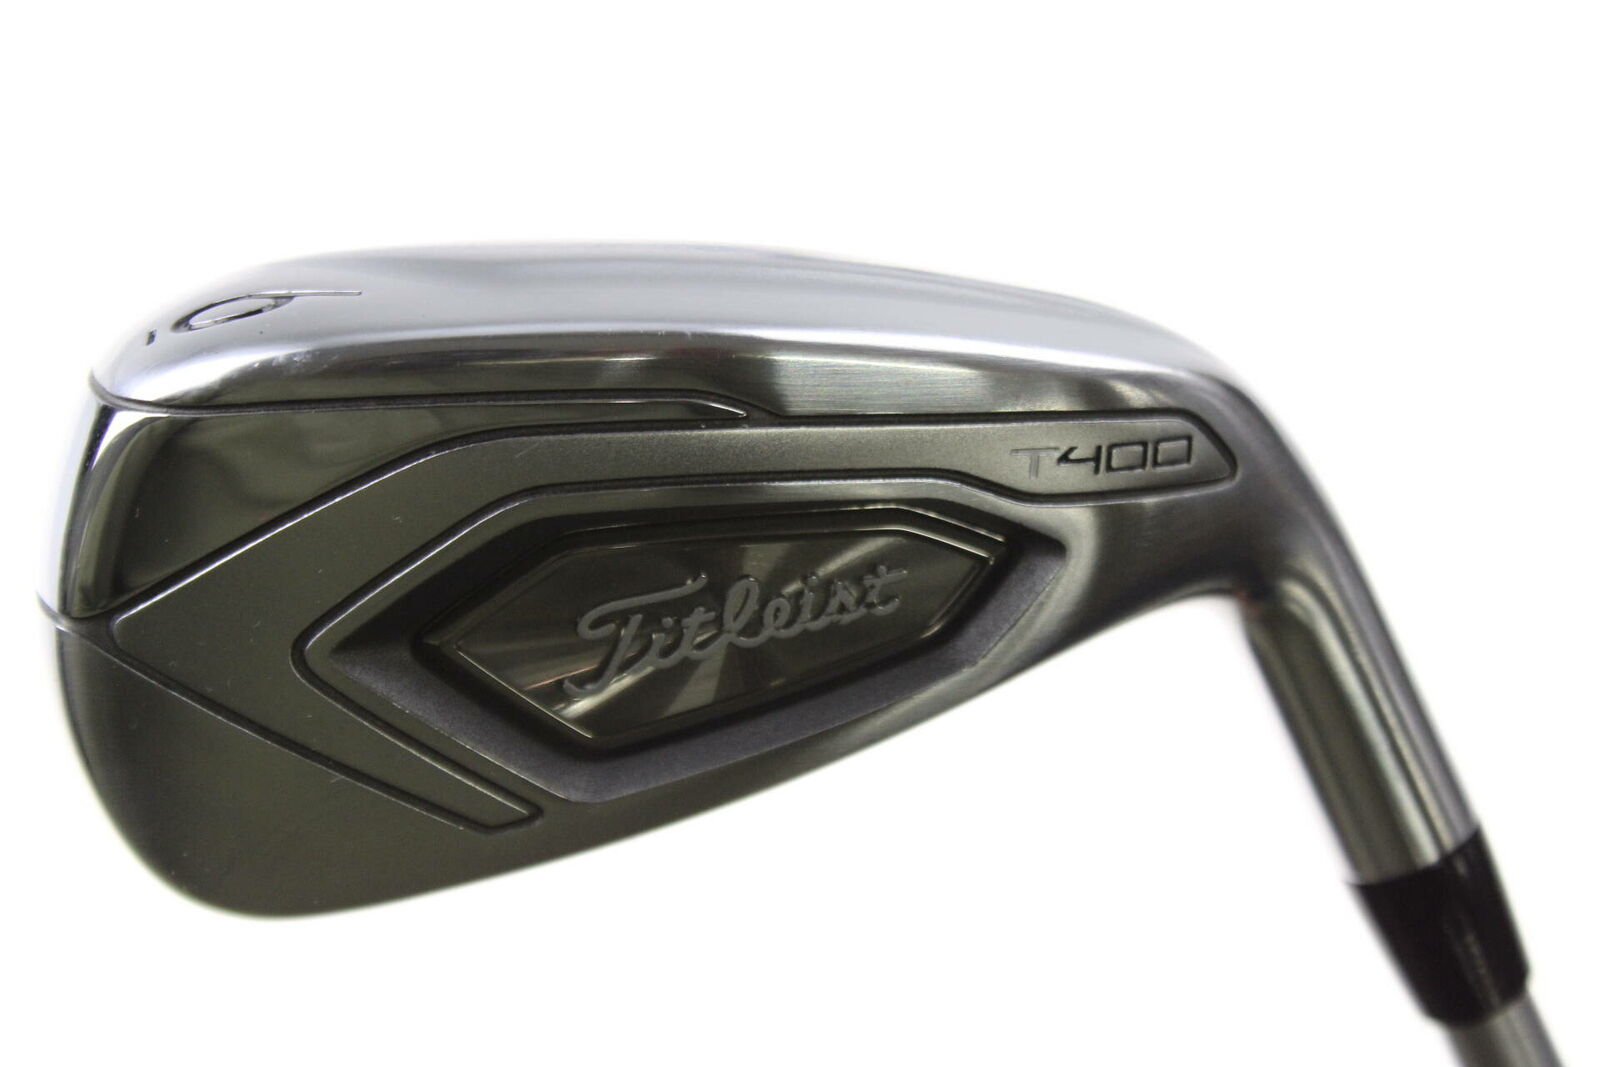 Titleist T400 Iron Set 6-PW - W2 and W Regular Right-Handed Graphite #6220  Golf